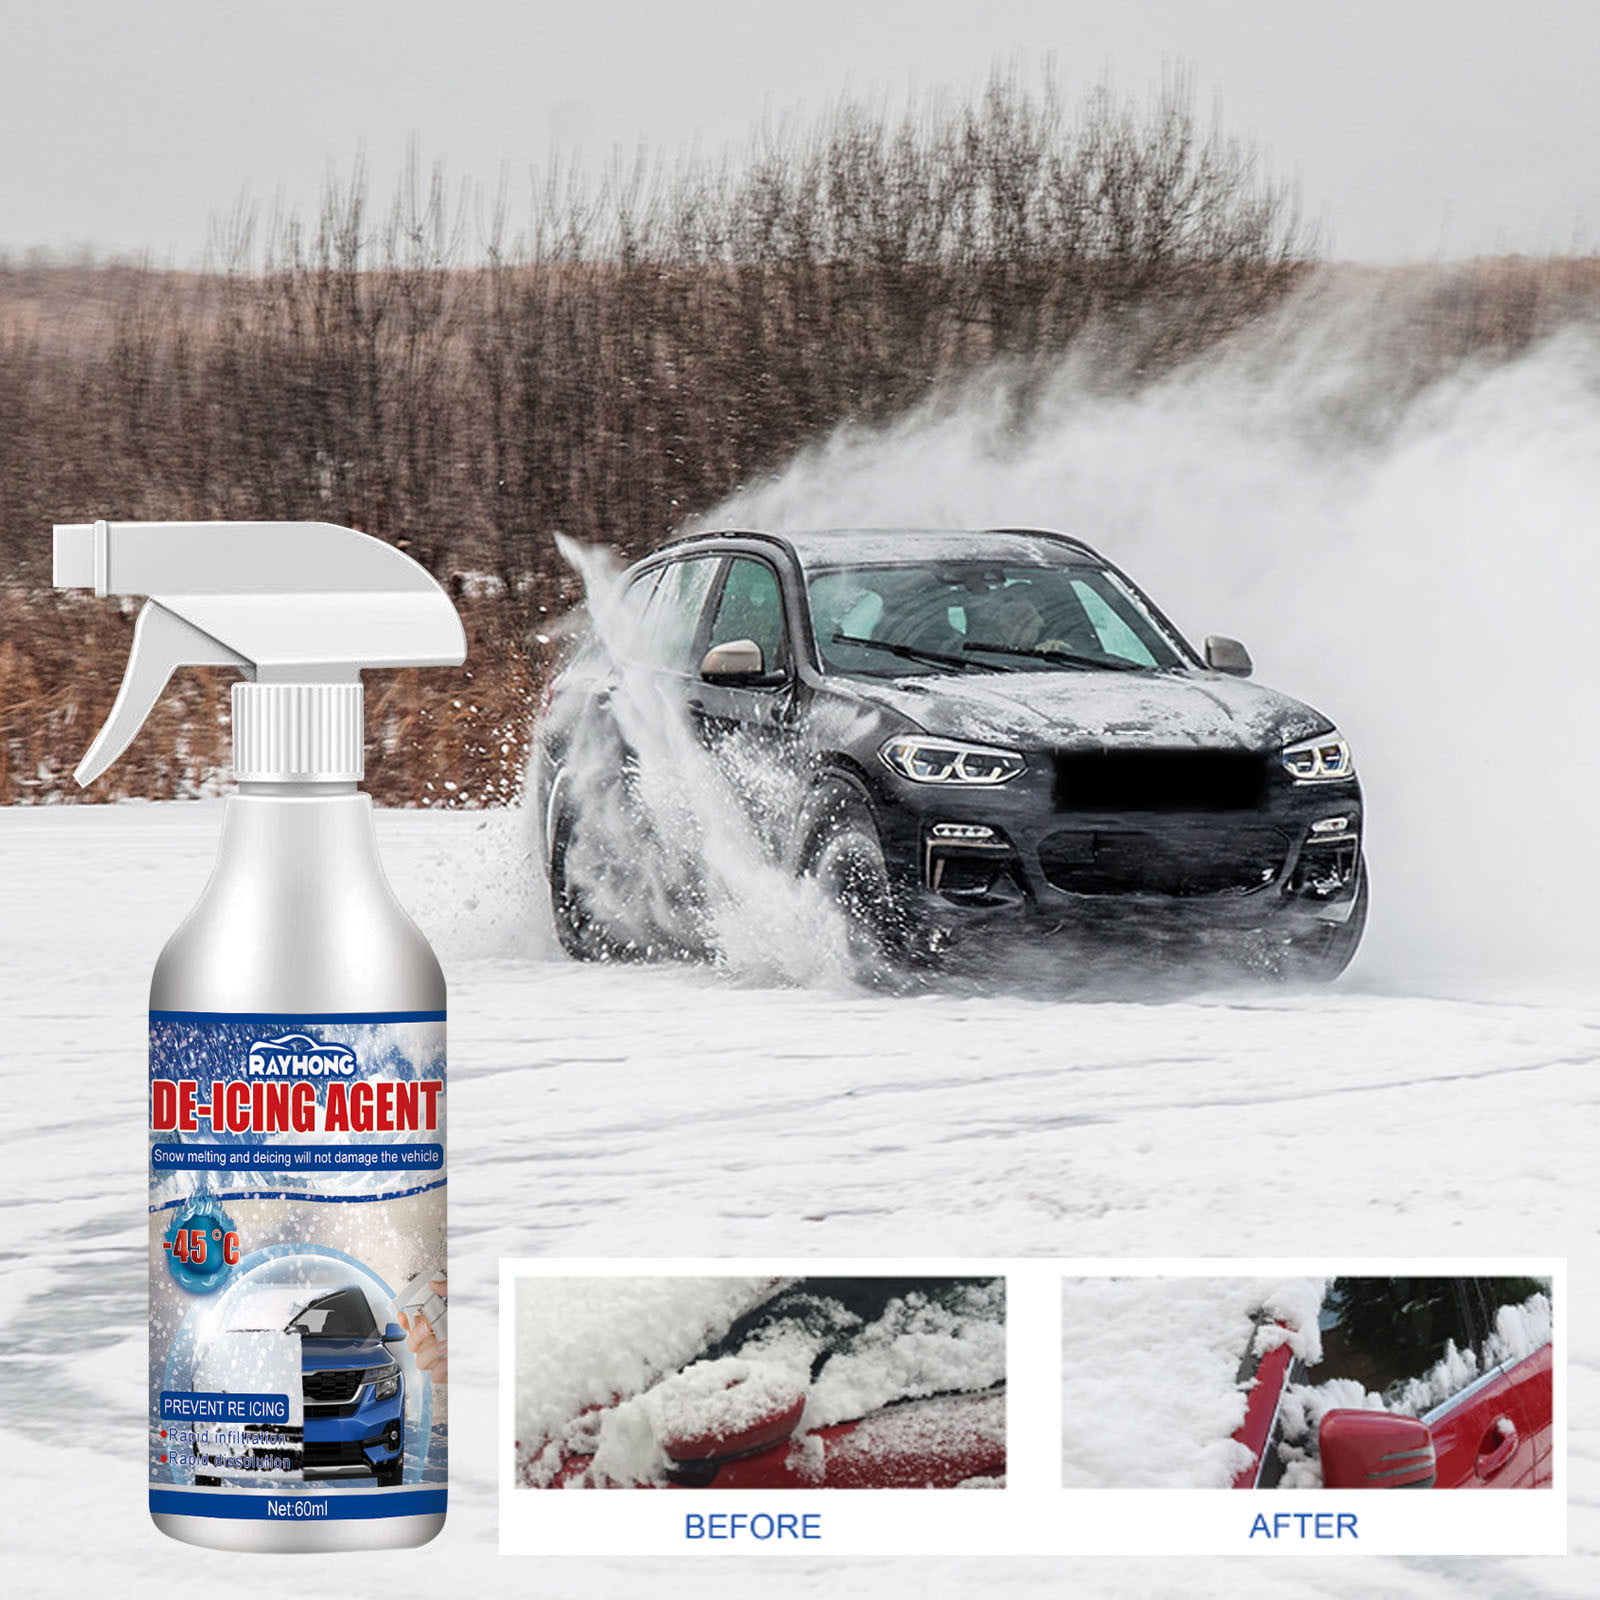 Pompotops Ice Melt for Car 60ml, Auto Windshield Deicing Spray Snow Melting Spray Windshield De-Icer for Car Windshield Windows Wipers and Mirrors